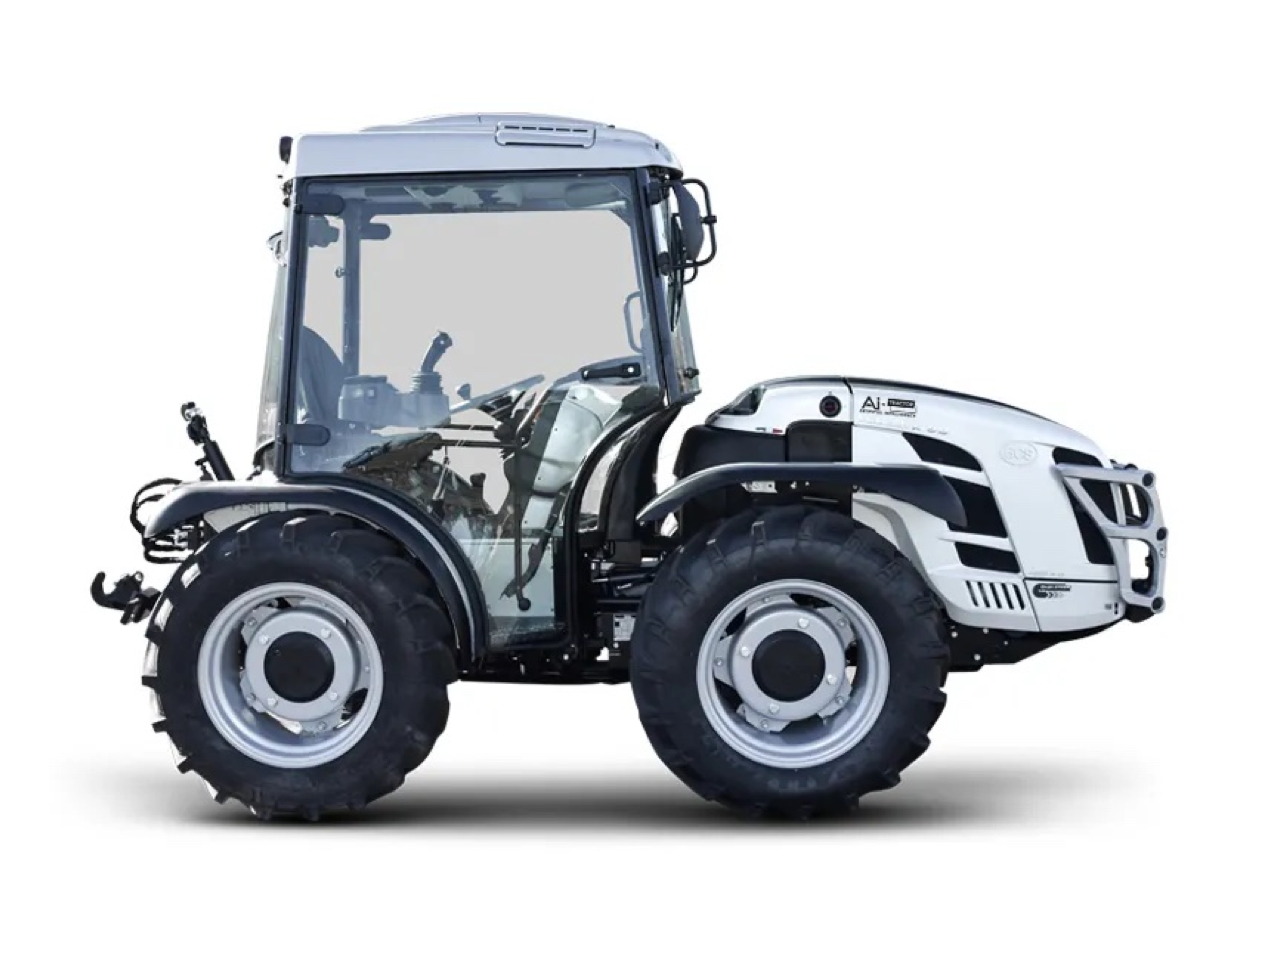 Bcs Volcan K90 RS AI-Tractor